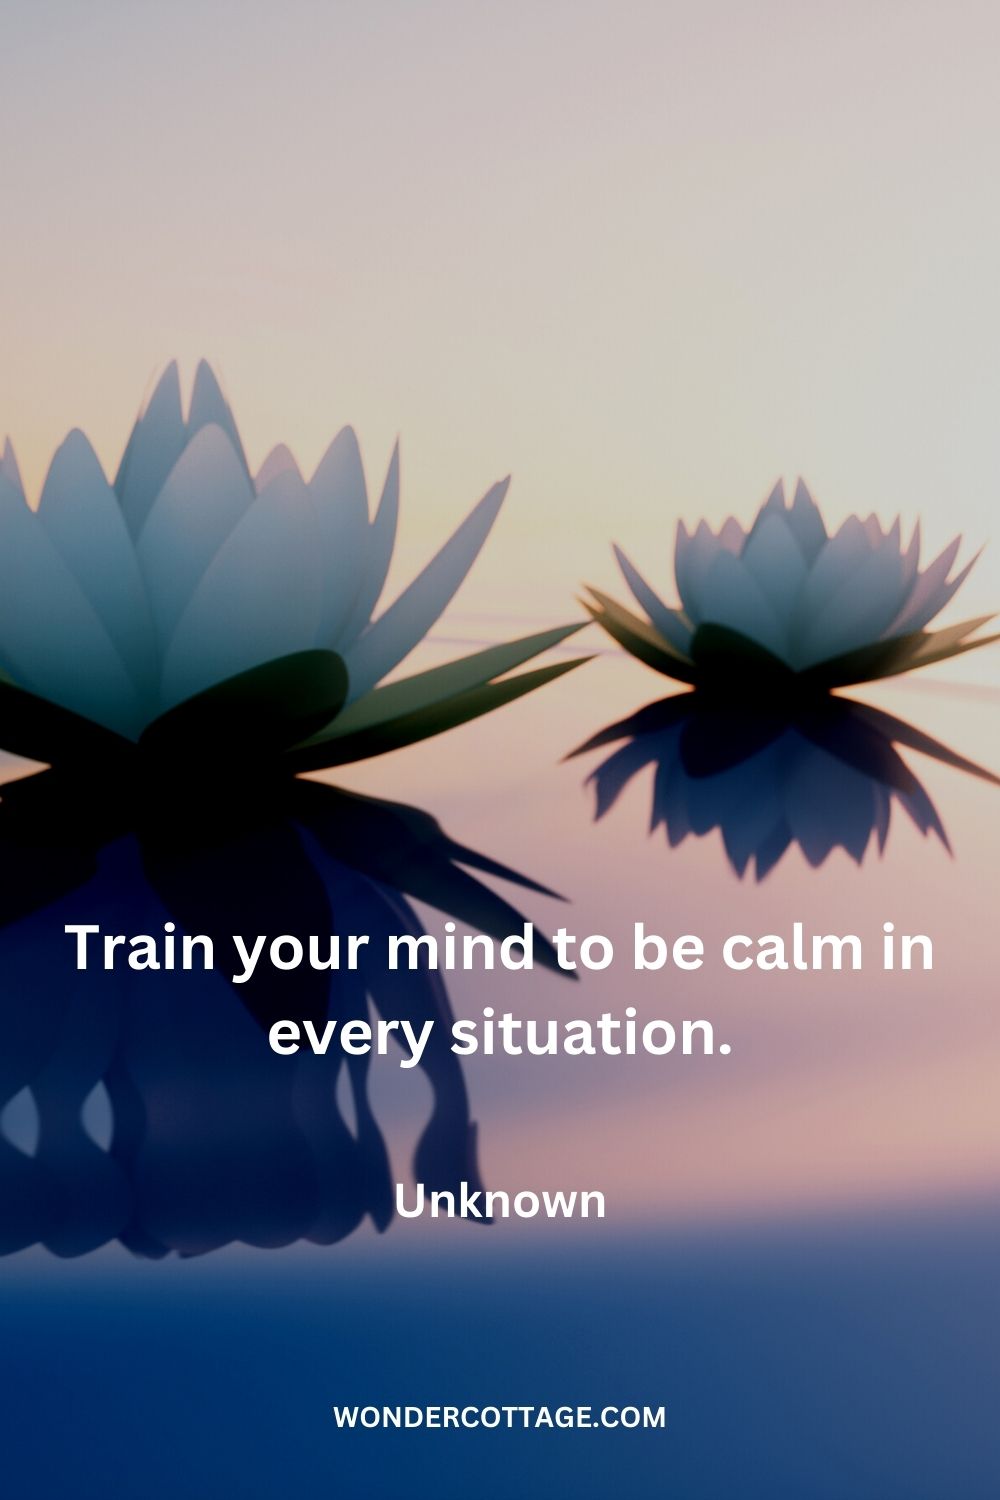 Train your mind to be calm in every situation. Unknown